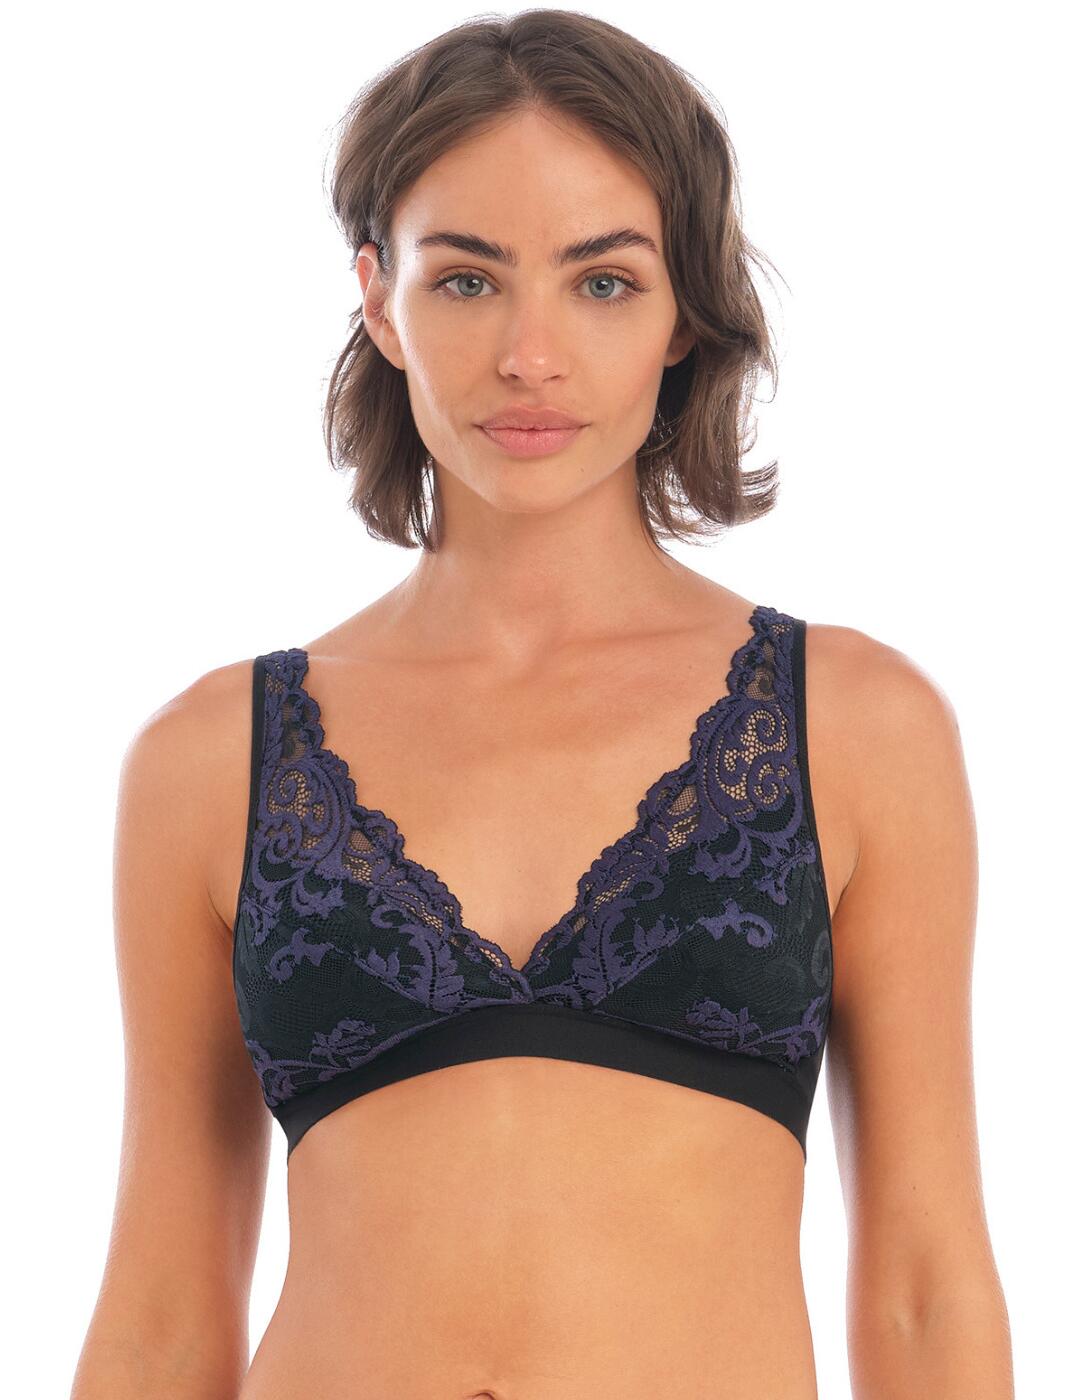 Instant Icon Cafe Au Lait Bralette from Wacoal